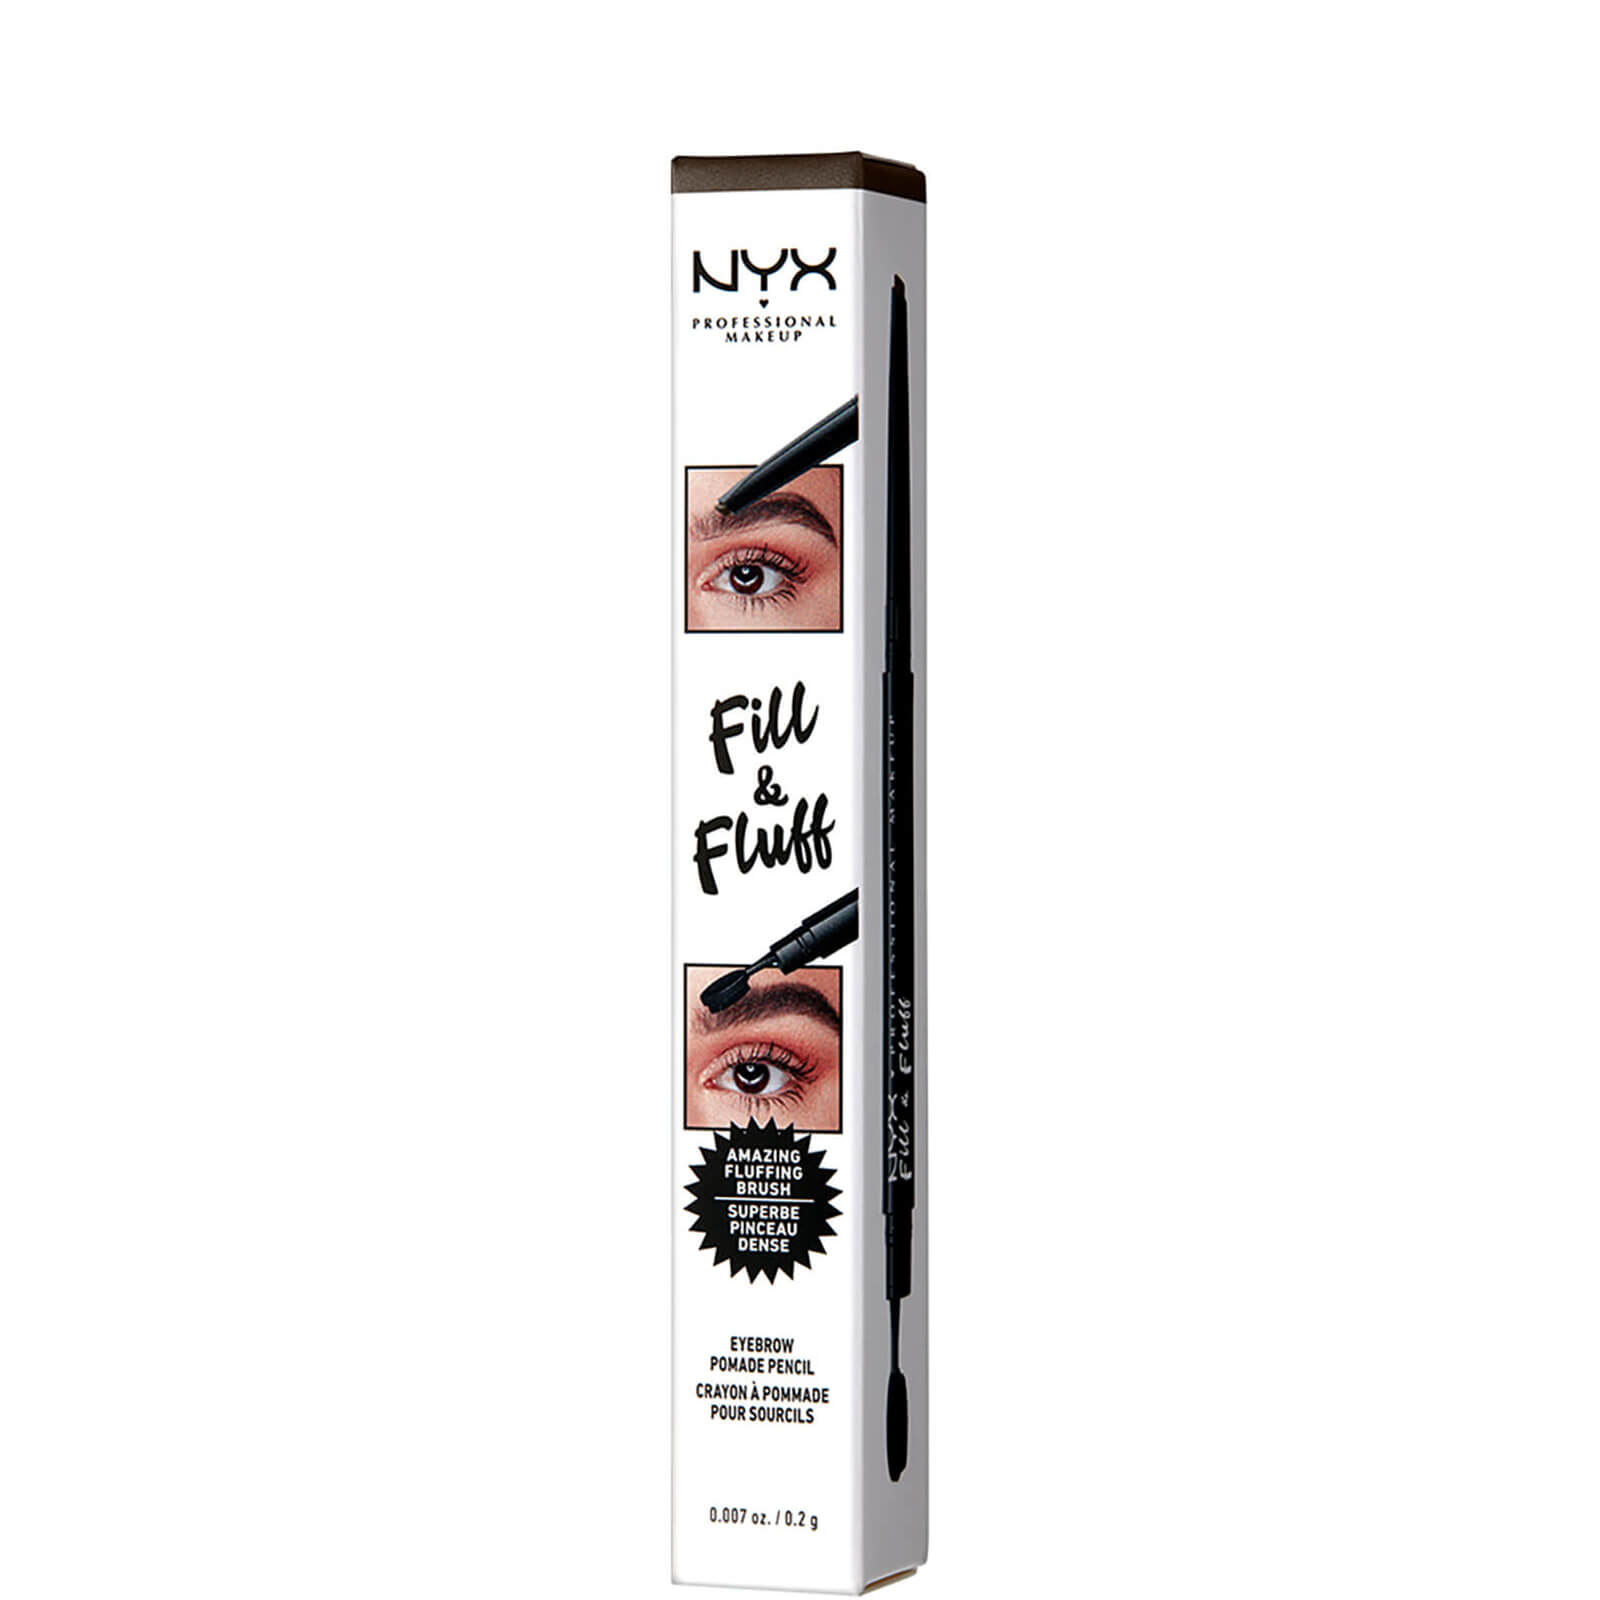 NYX Professional Makeup Fill and Fluff Eyebrow Pomade Pencil 0.2g (Various Shades) - Espresso